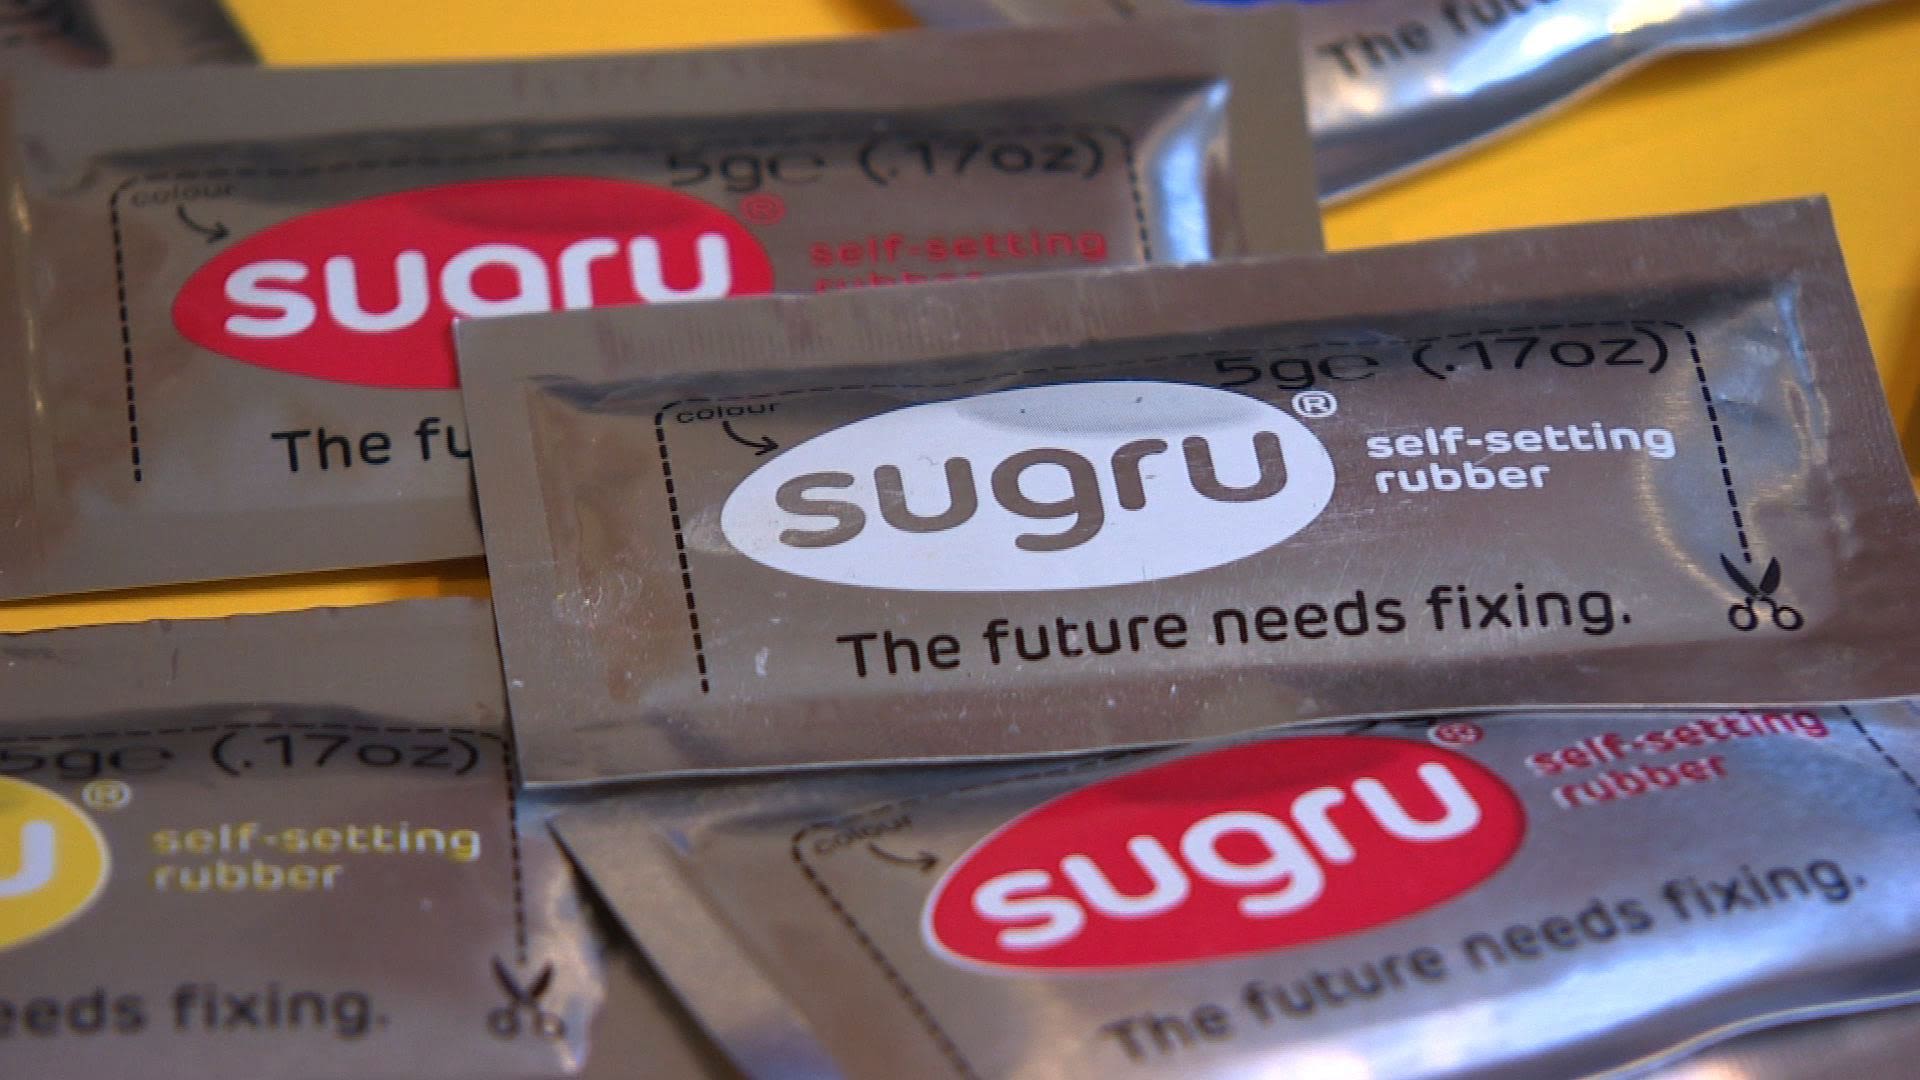 How to Fix Household Items With Sugru Glue